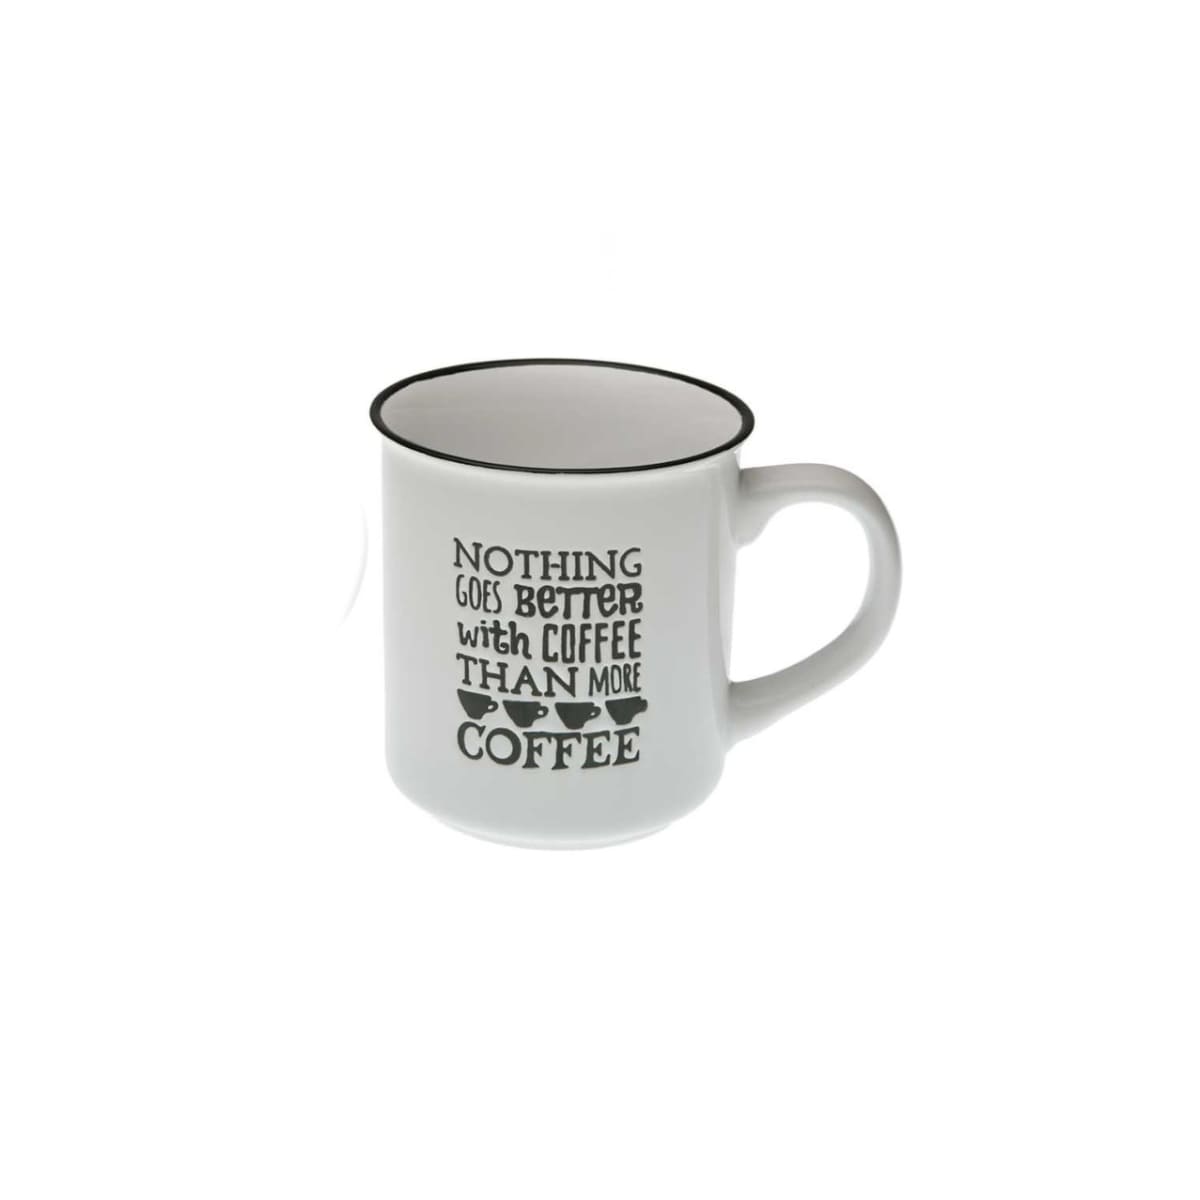 Caneca "Nothing goes better with coffee than more coffee"